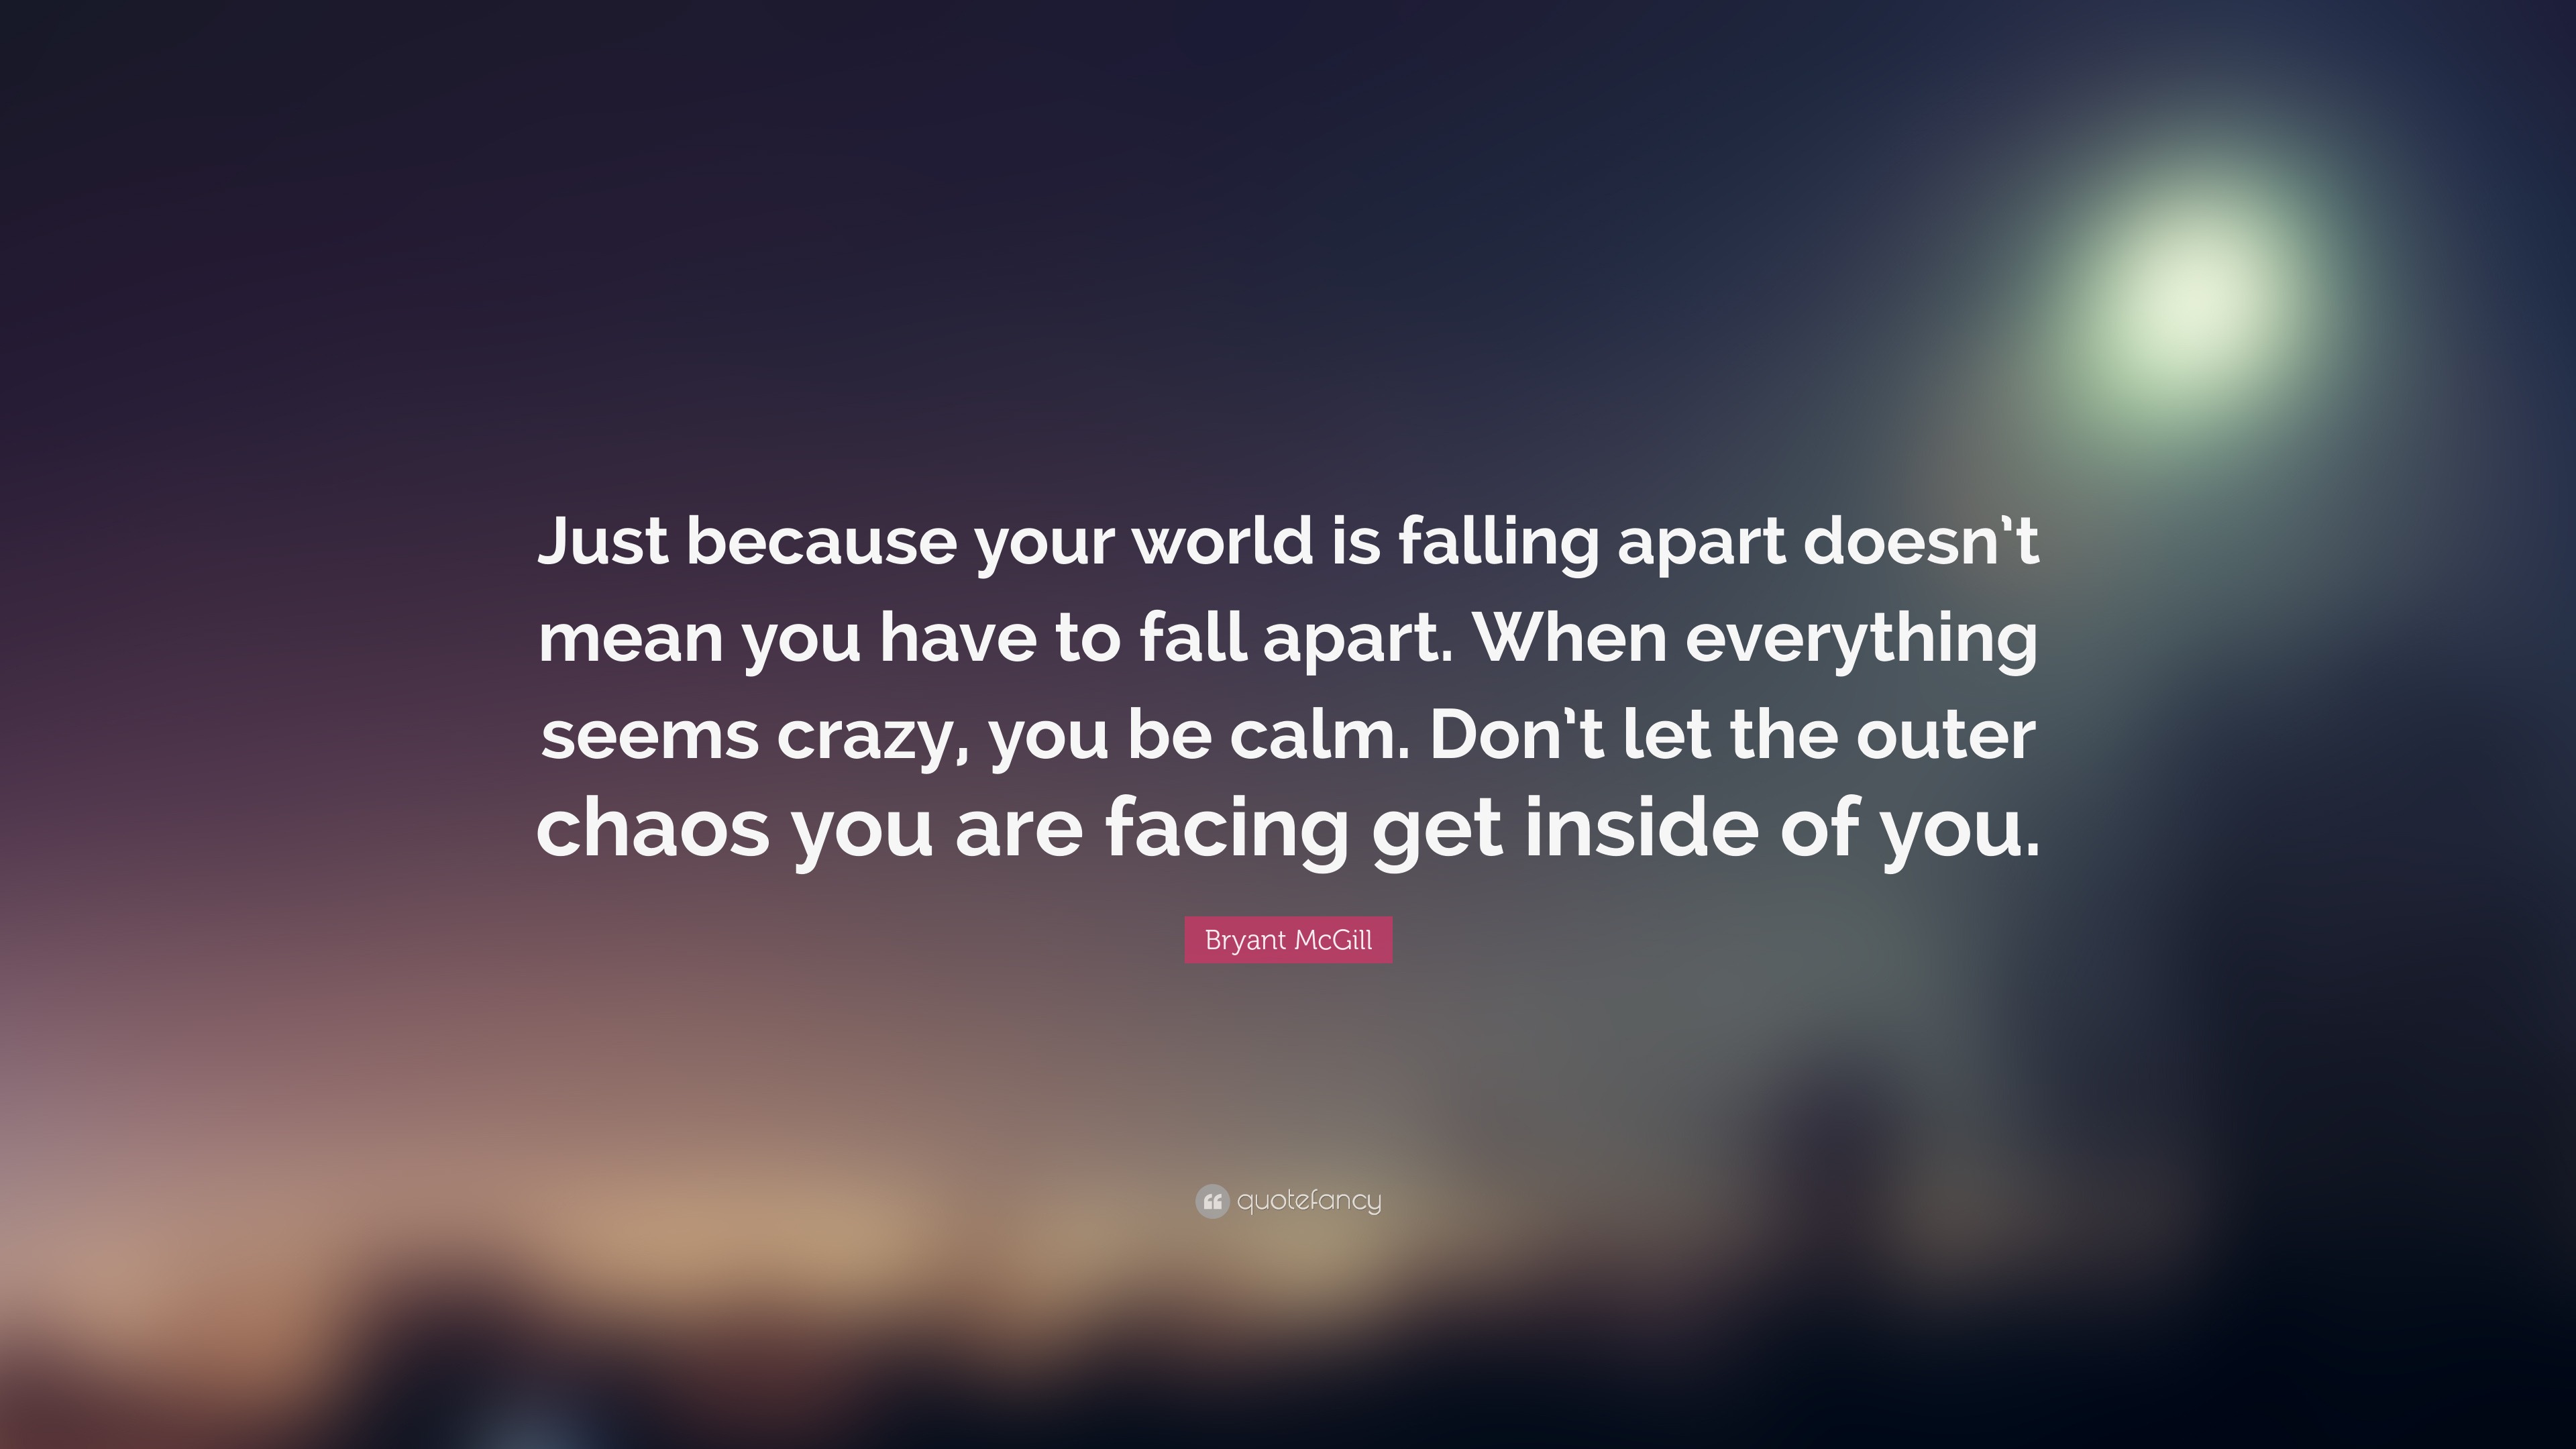 Bryant McGill Quote “Just because your world is falling apart doesn’t